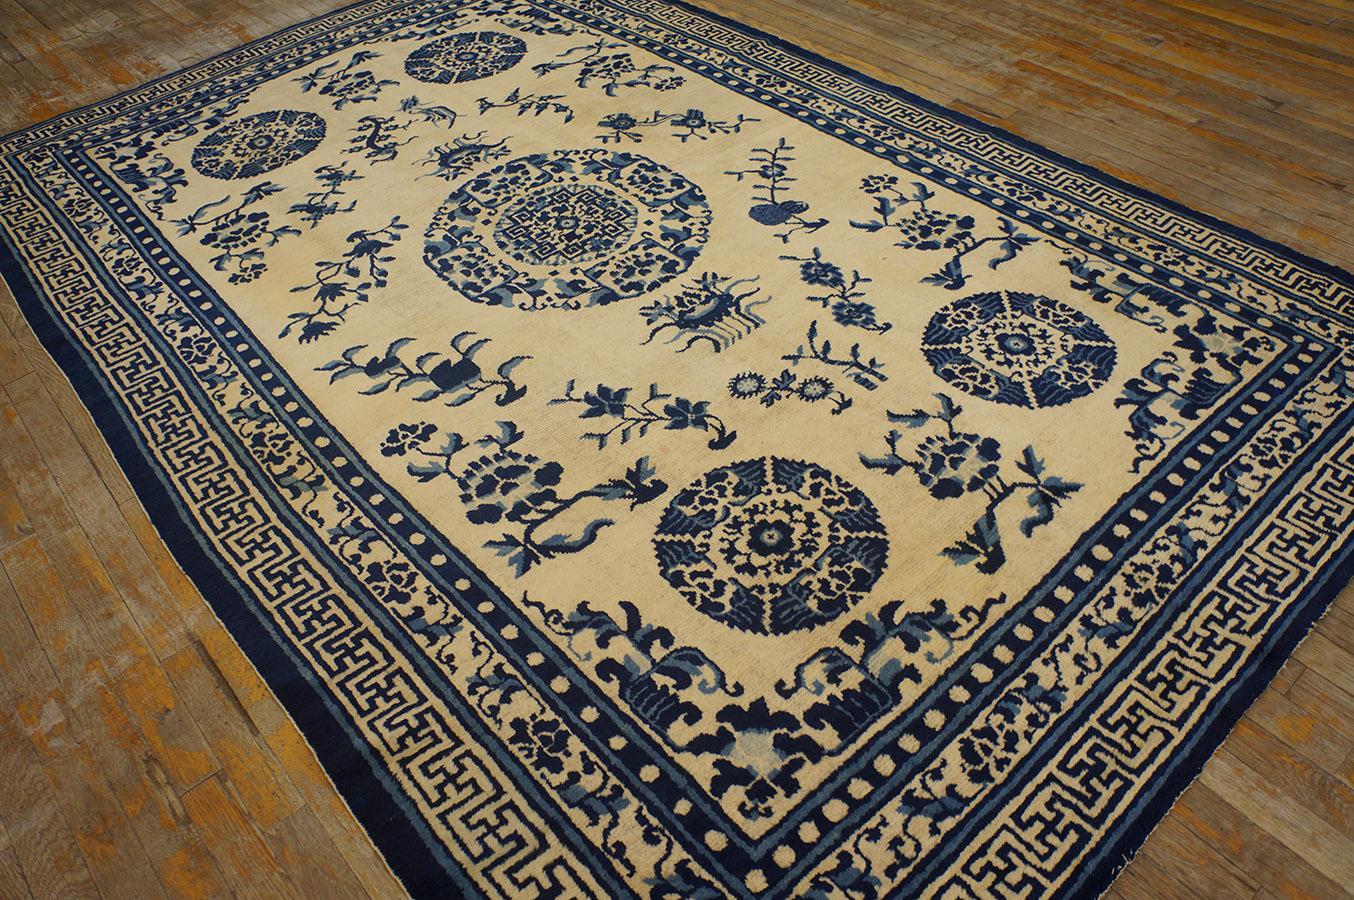 Hand-Knotted Mid 19th Century Chinese Ningxia Carpet ( 5'9